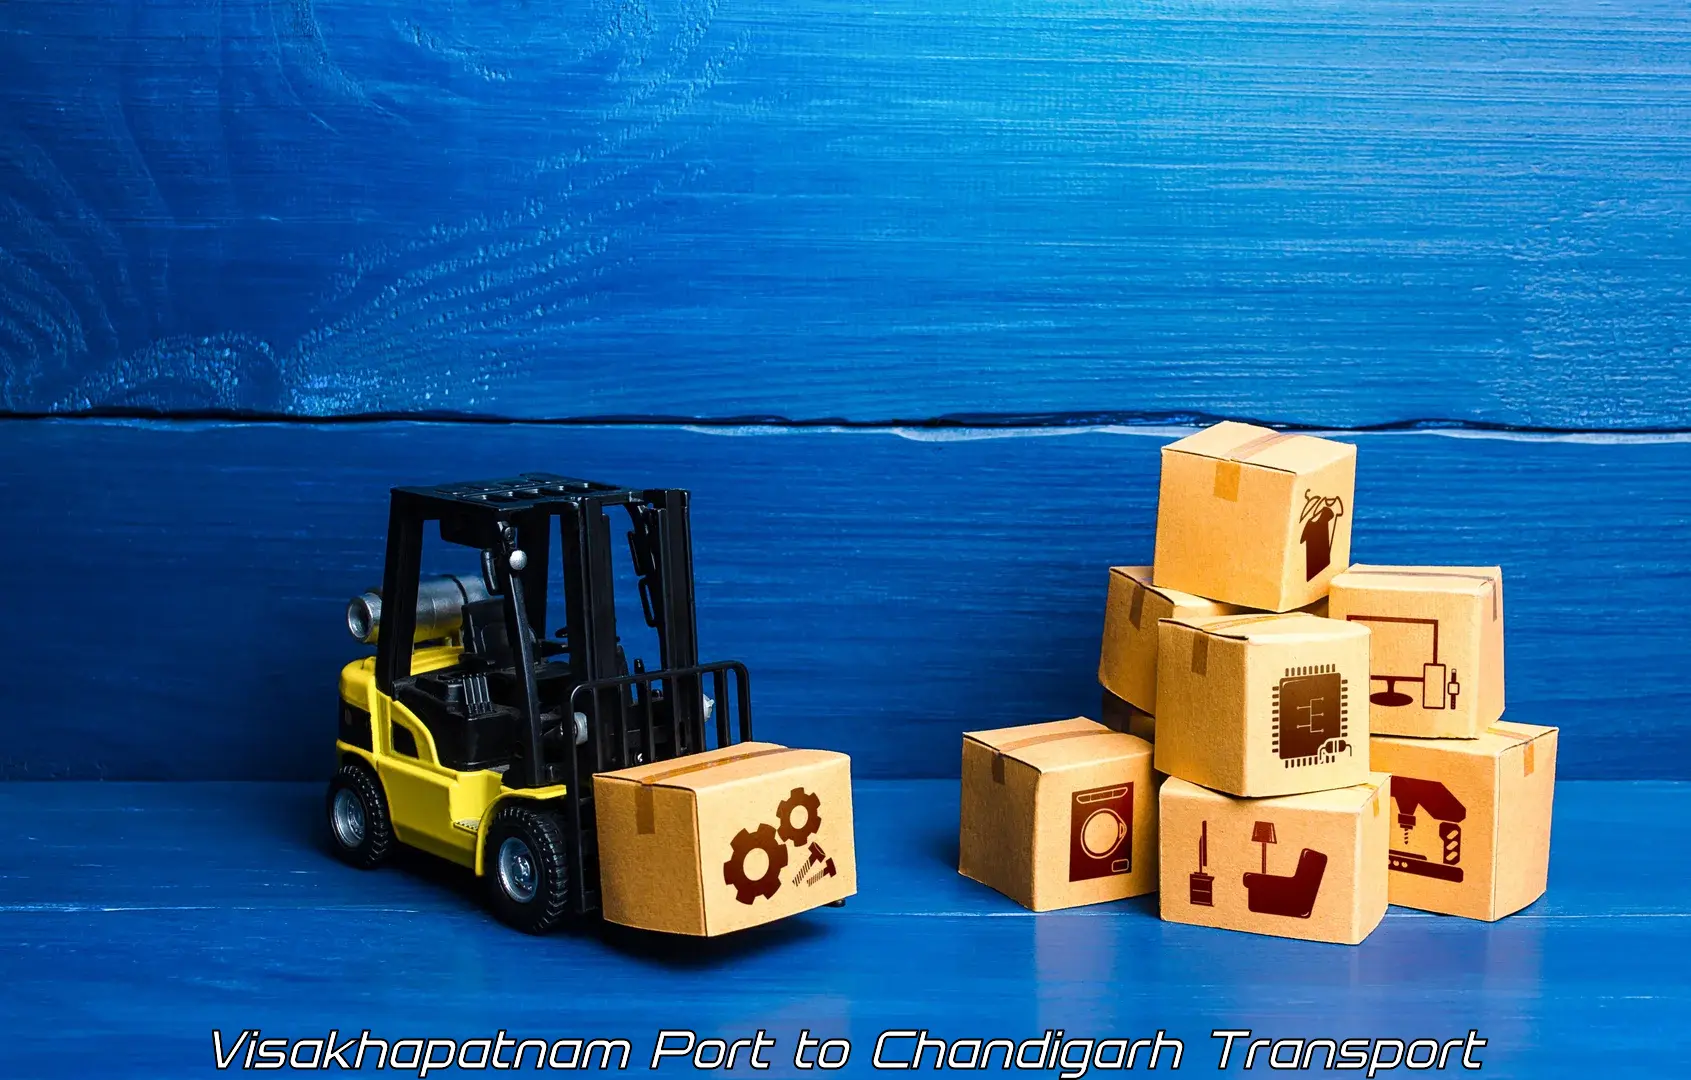 Best transport services in India Visakhapatnam Port to Chandigarh